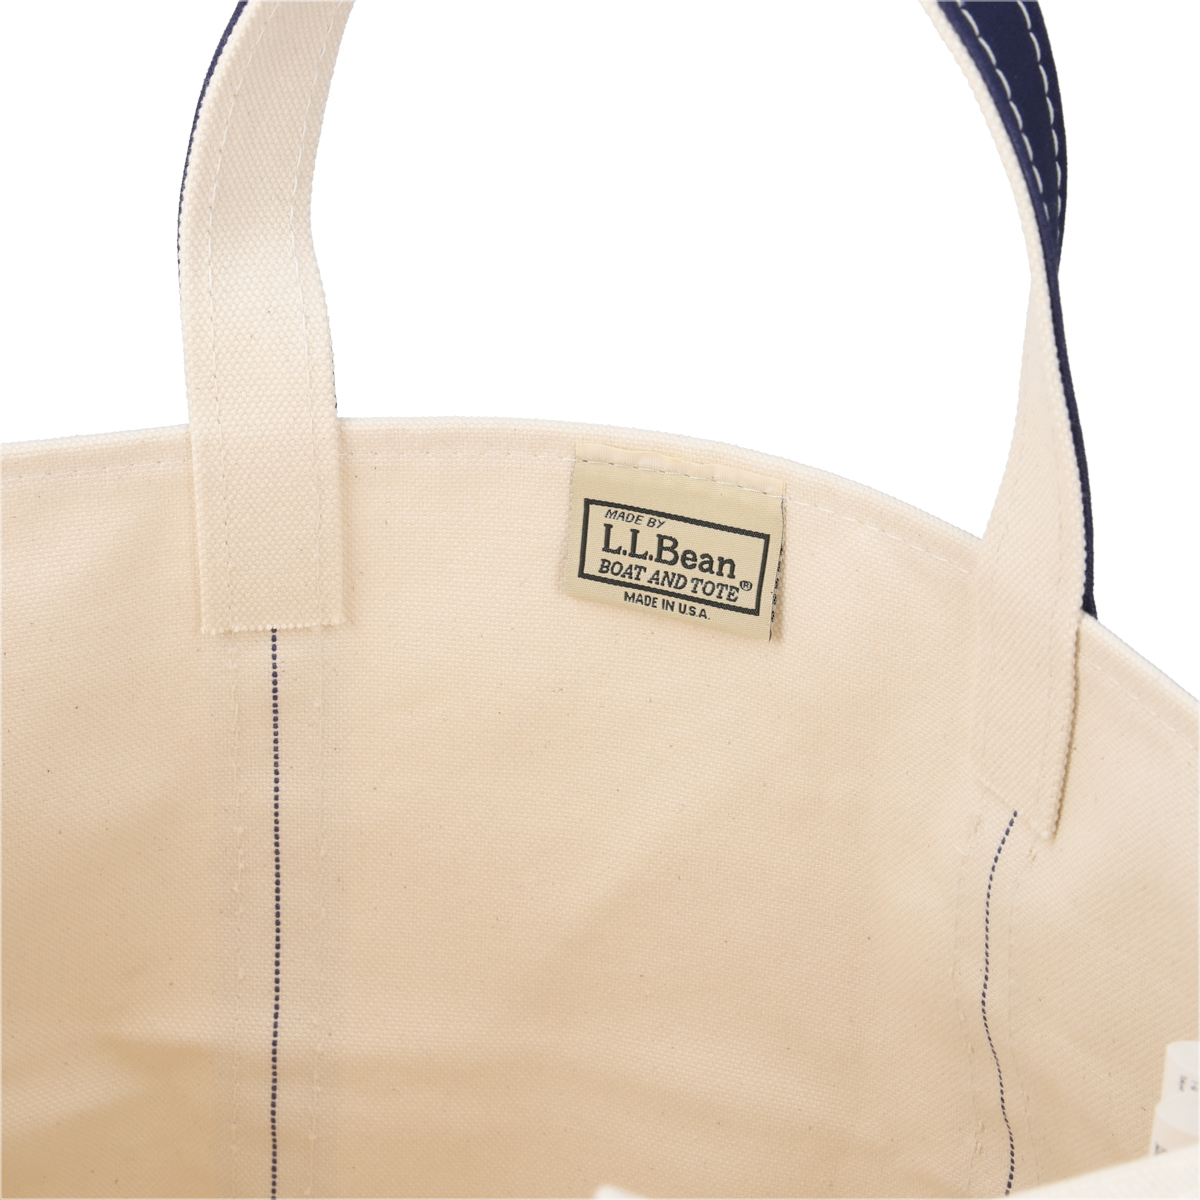 WIND AND SEA L.L.BEAN Boat and Tote - トートバッグ